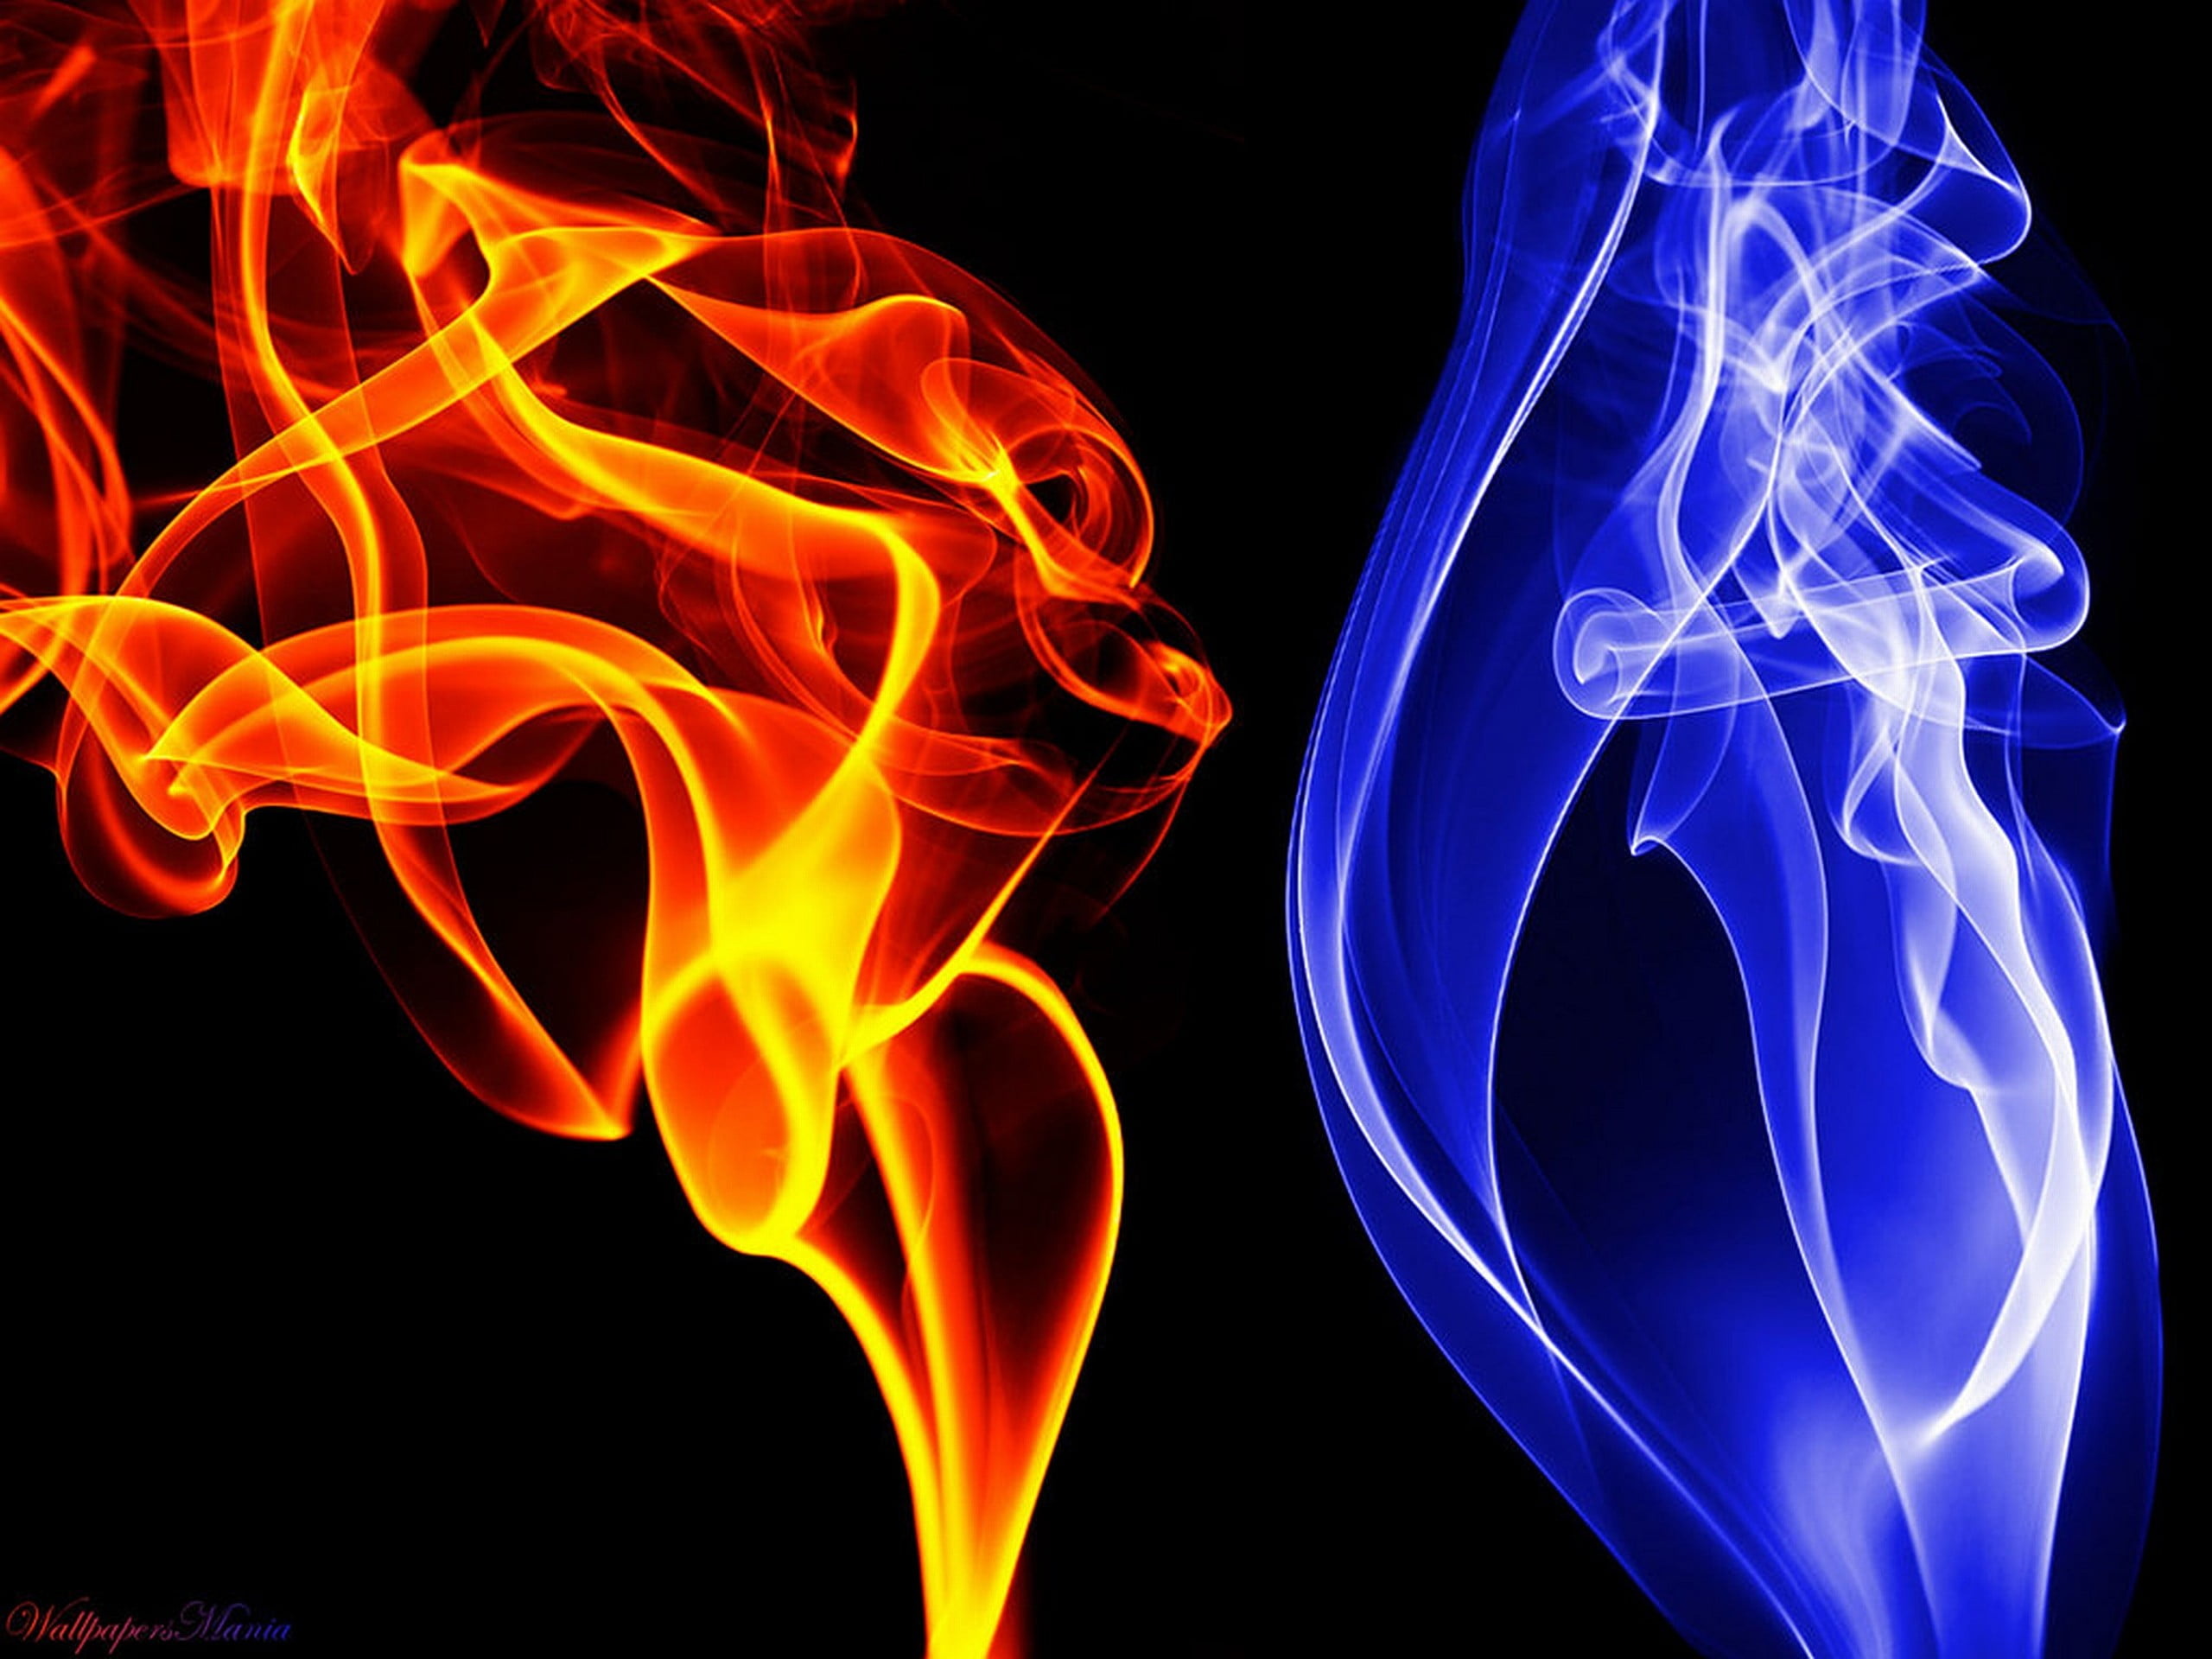 Red and blue flames, Illustrative brilliance, Contrasting colors, Fiery illustration, Striking visuals, 2560x1920 HD Desktop